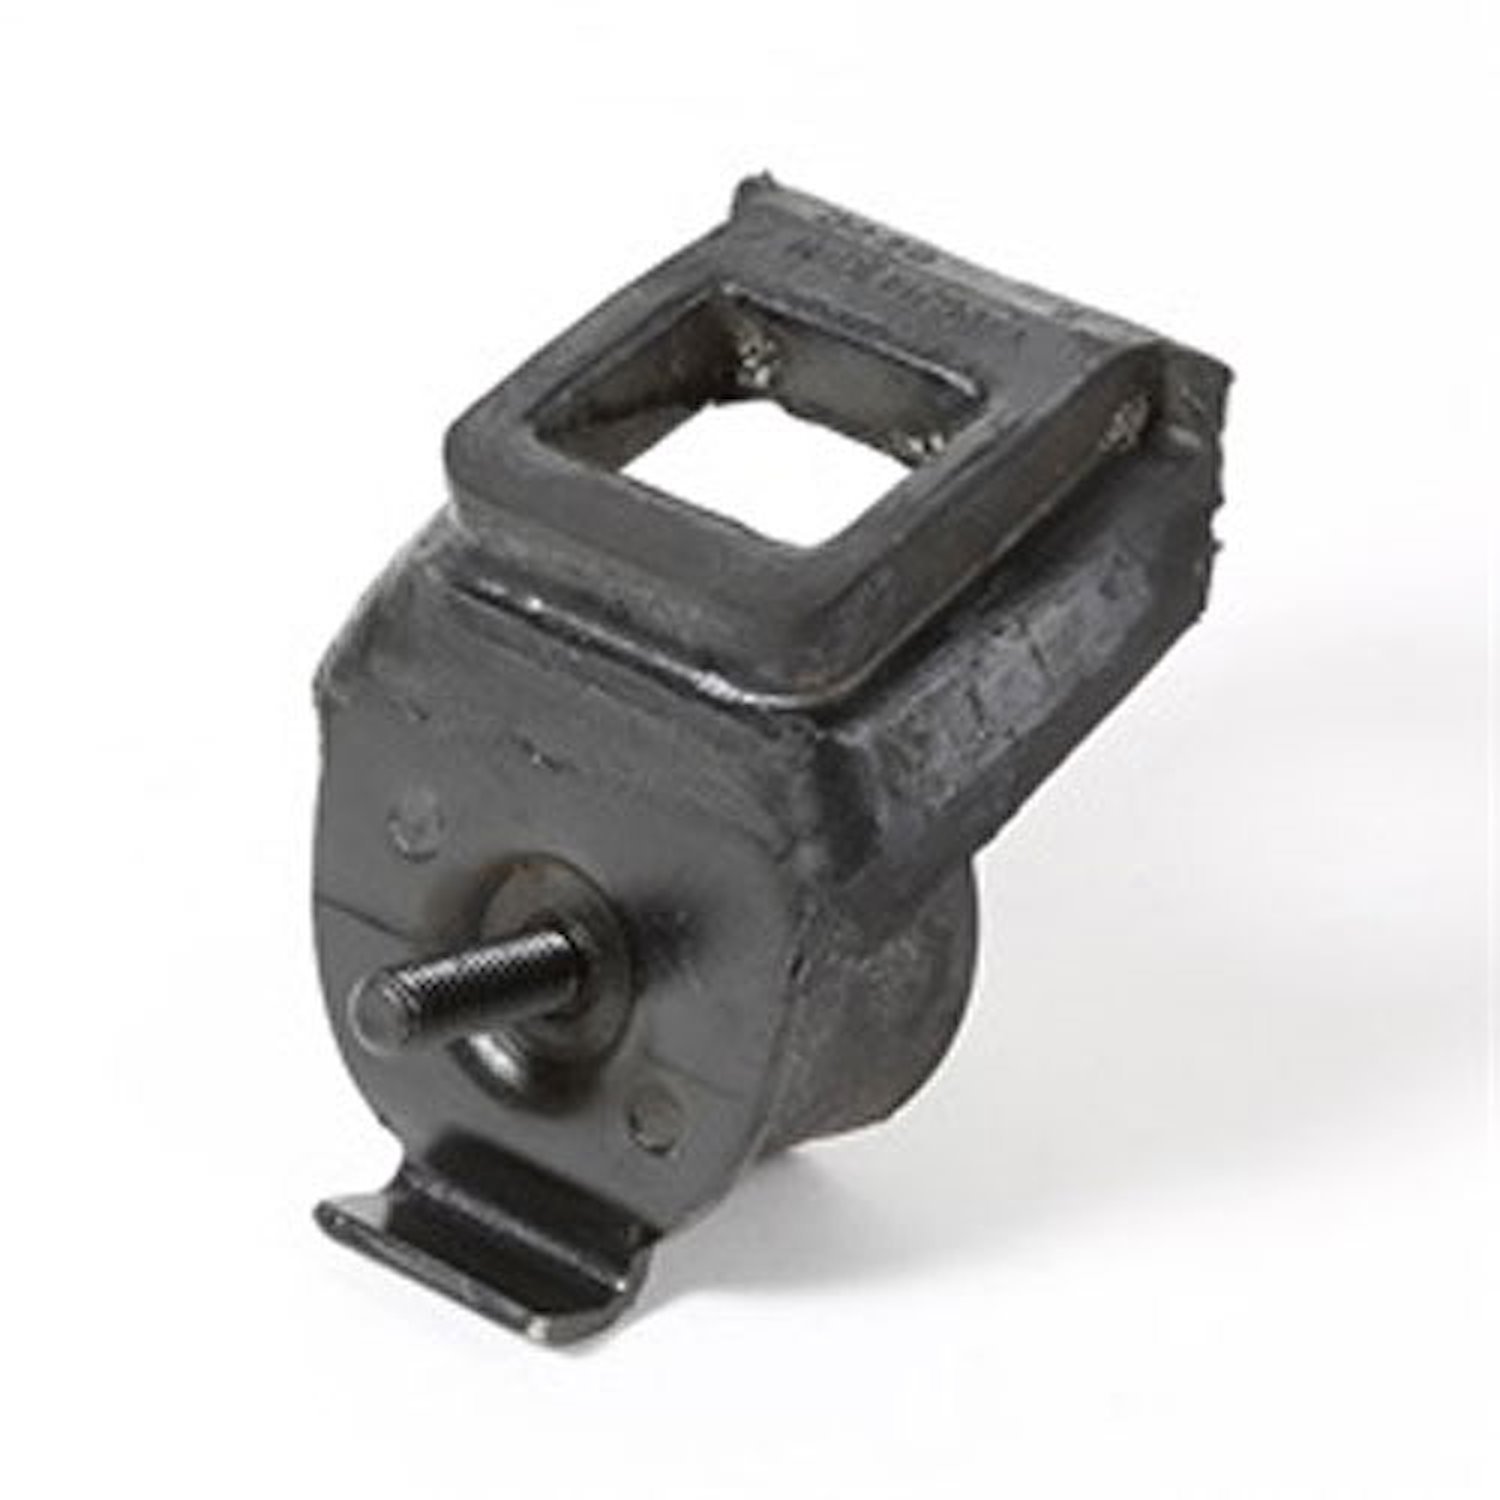 This front engine mount from Omix-ADA fits the left or right sides on the 2.5L engine found in 80-83